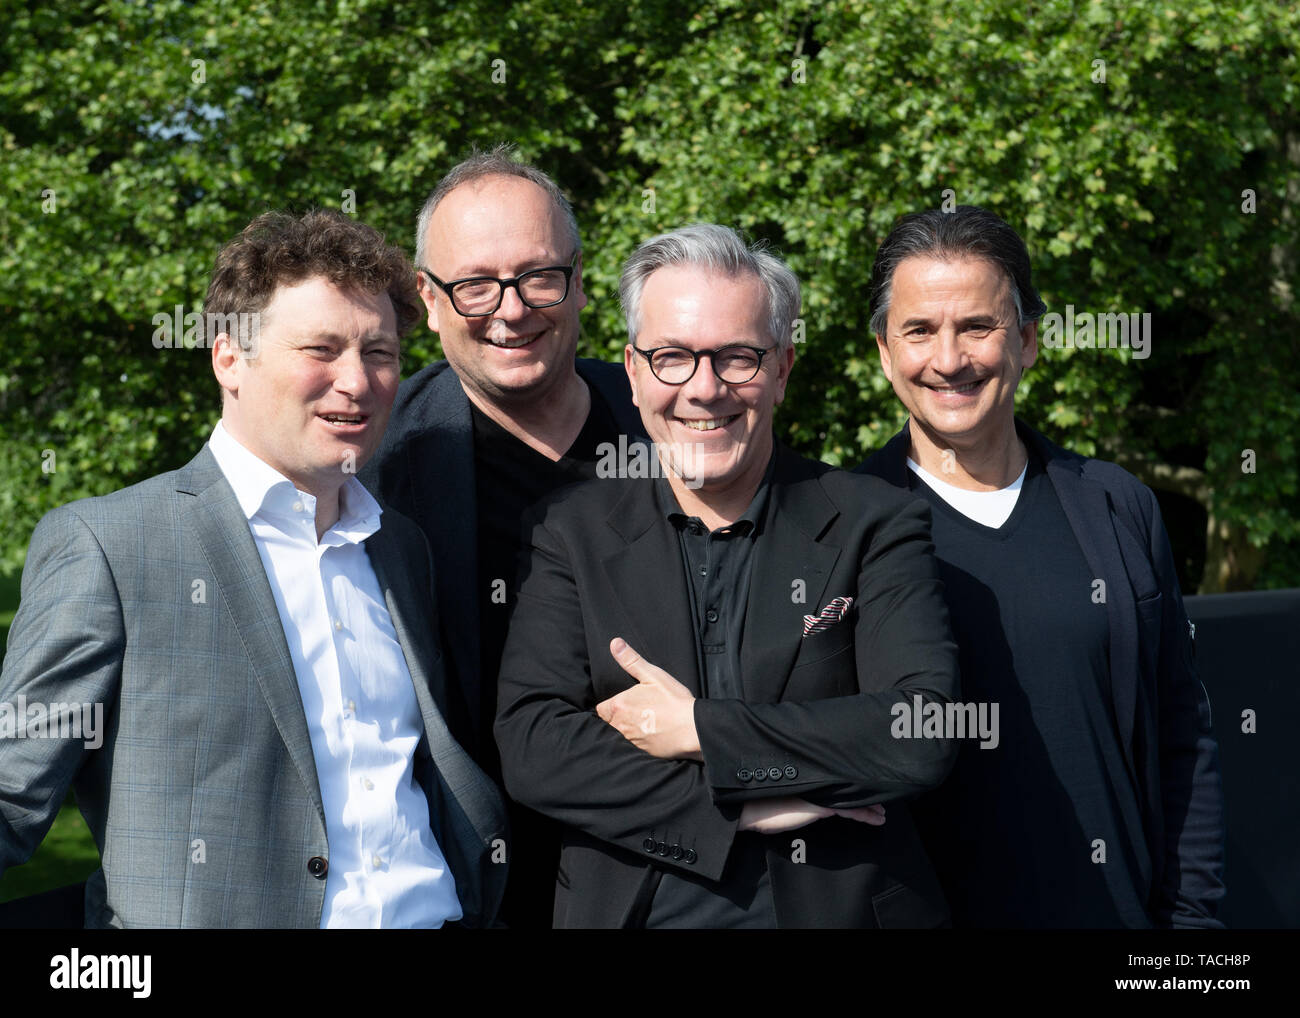 Stuttgart, Germany. 24th May, 2019. The directors of the Staatstheater Stuttgart, Viktor Schoner (l-r, opera), Burkhard C. Kosminski (drama), Marc-Oliver Hendriks (managing director) and Tamas Detrich (ballet) will be together for a photo session. They will present their plans for the next season at a press conference. Credit: Bernd Weissbrod/dpa/Alamy Live News Stock Photo